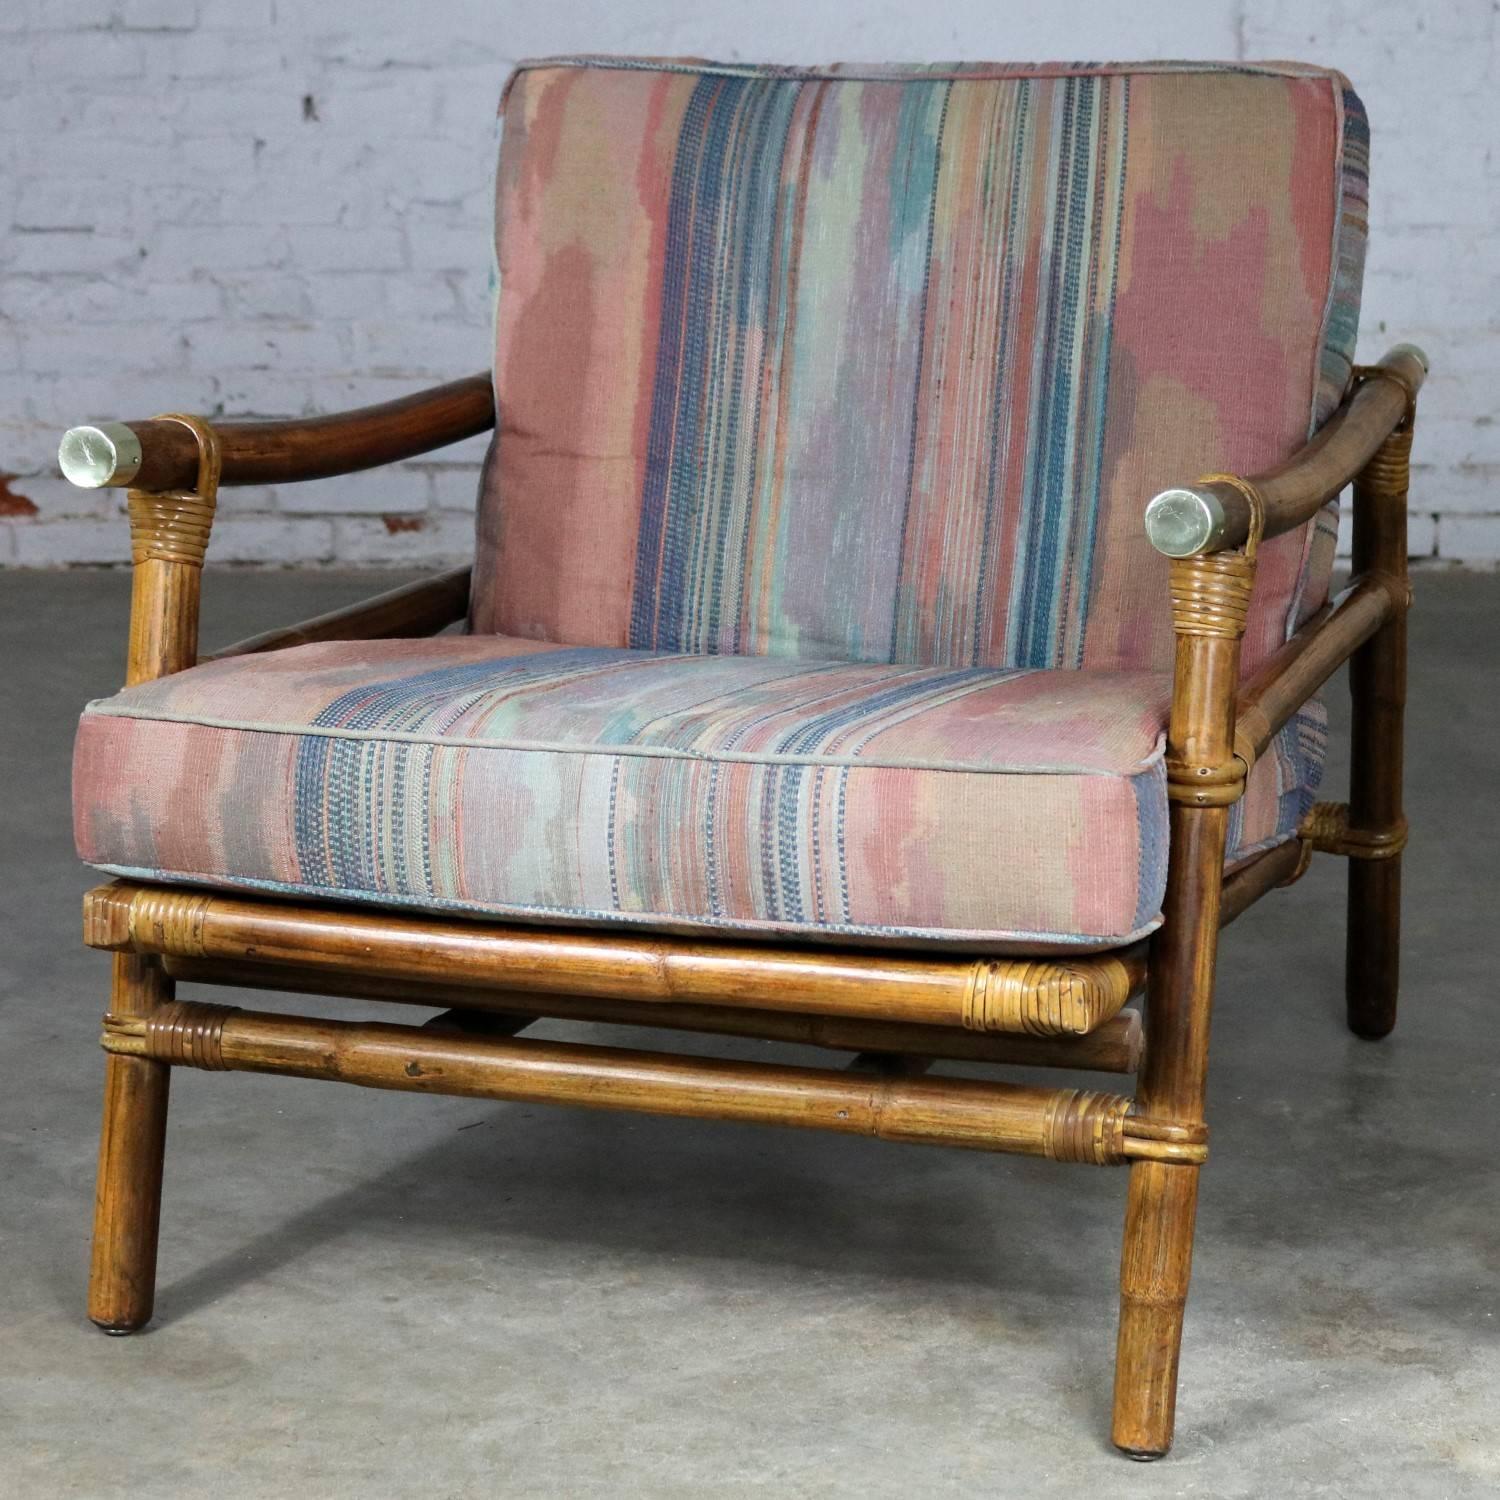 Lovely vintage Ficks Reed rattan Campaign style lounge or club chair with interesting brass cap accents by John Wisner for the Far Horizons collection. This chair is in fabulous original vintage condition. The rattan is extremely nice but, the